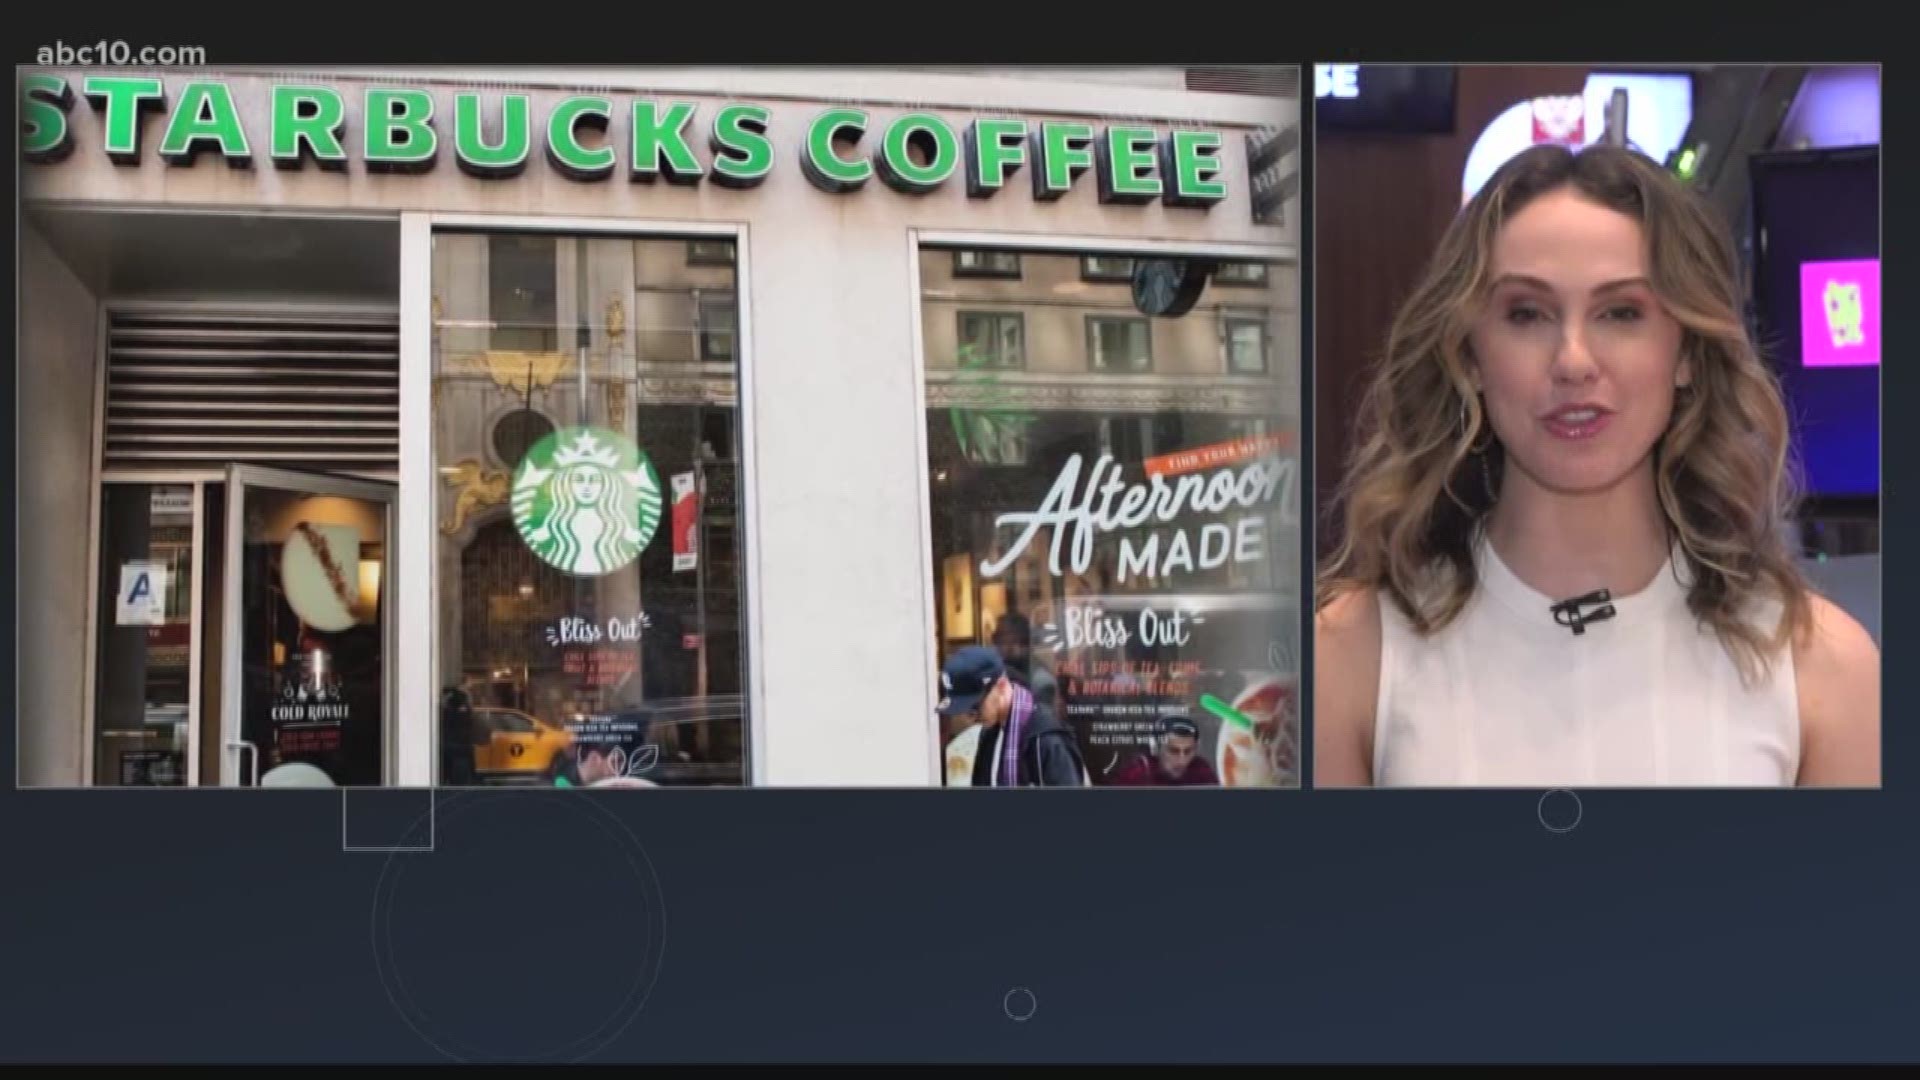 Starbucks payment app is the most popular. Instagram is rolling out a new feature allowing users to mute posts and stories from their feeds. And, the New York Stock Exchange is making history.